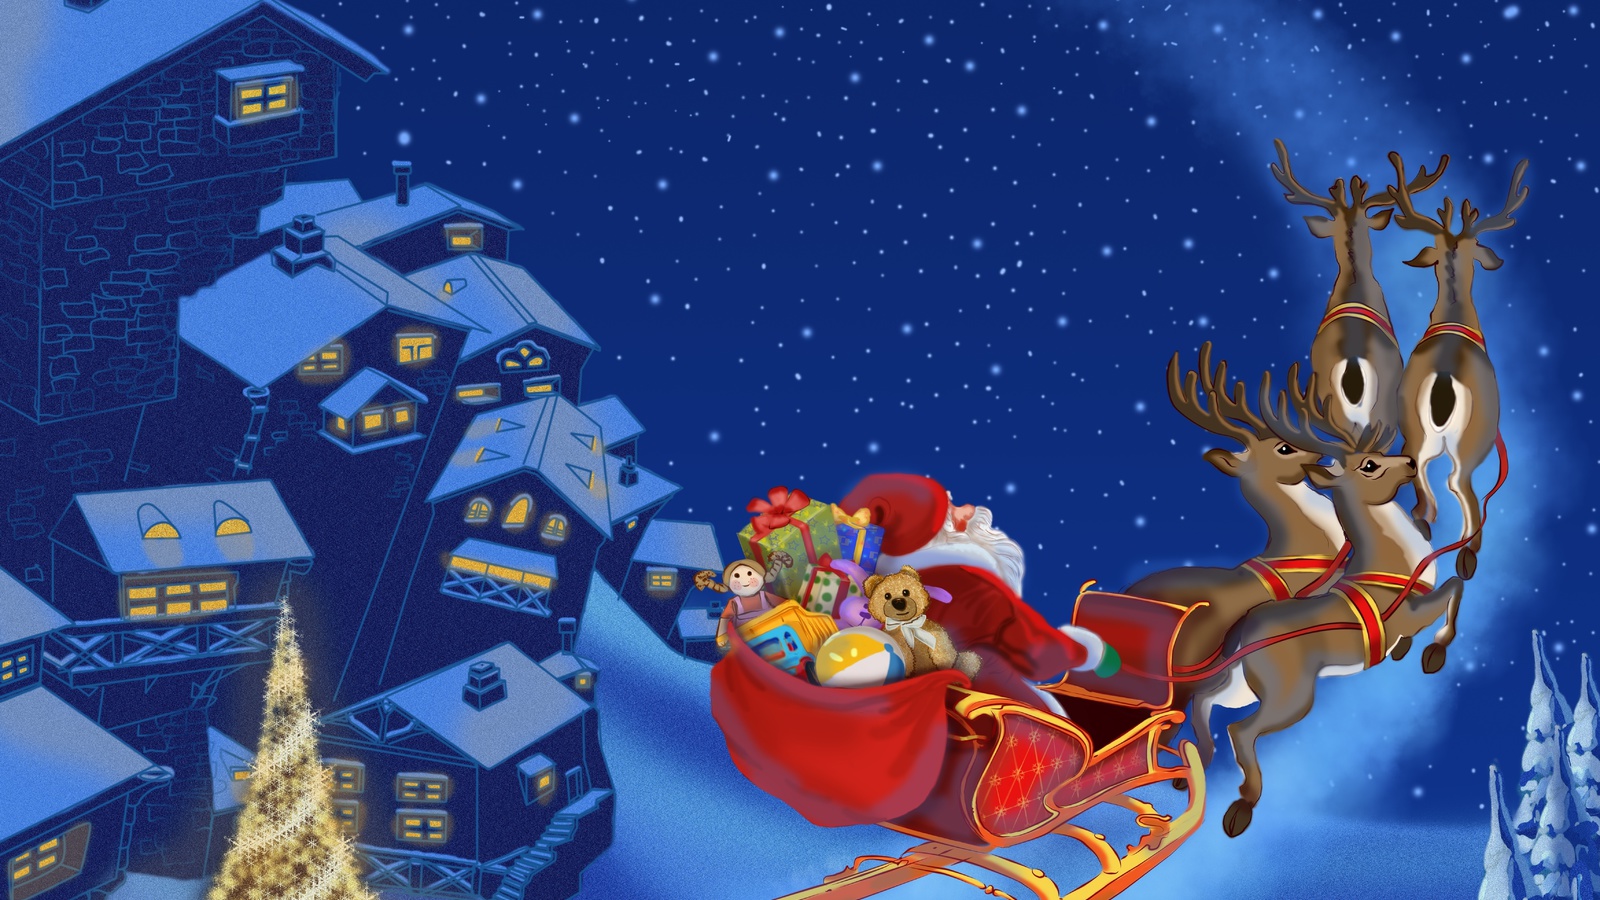 Santa claus is coming, snow, new year, town, reindeer, merry christmas, christmas tree